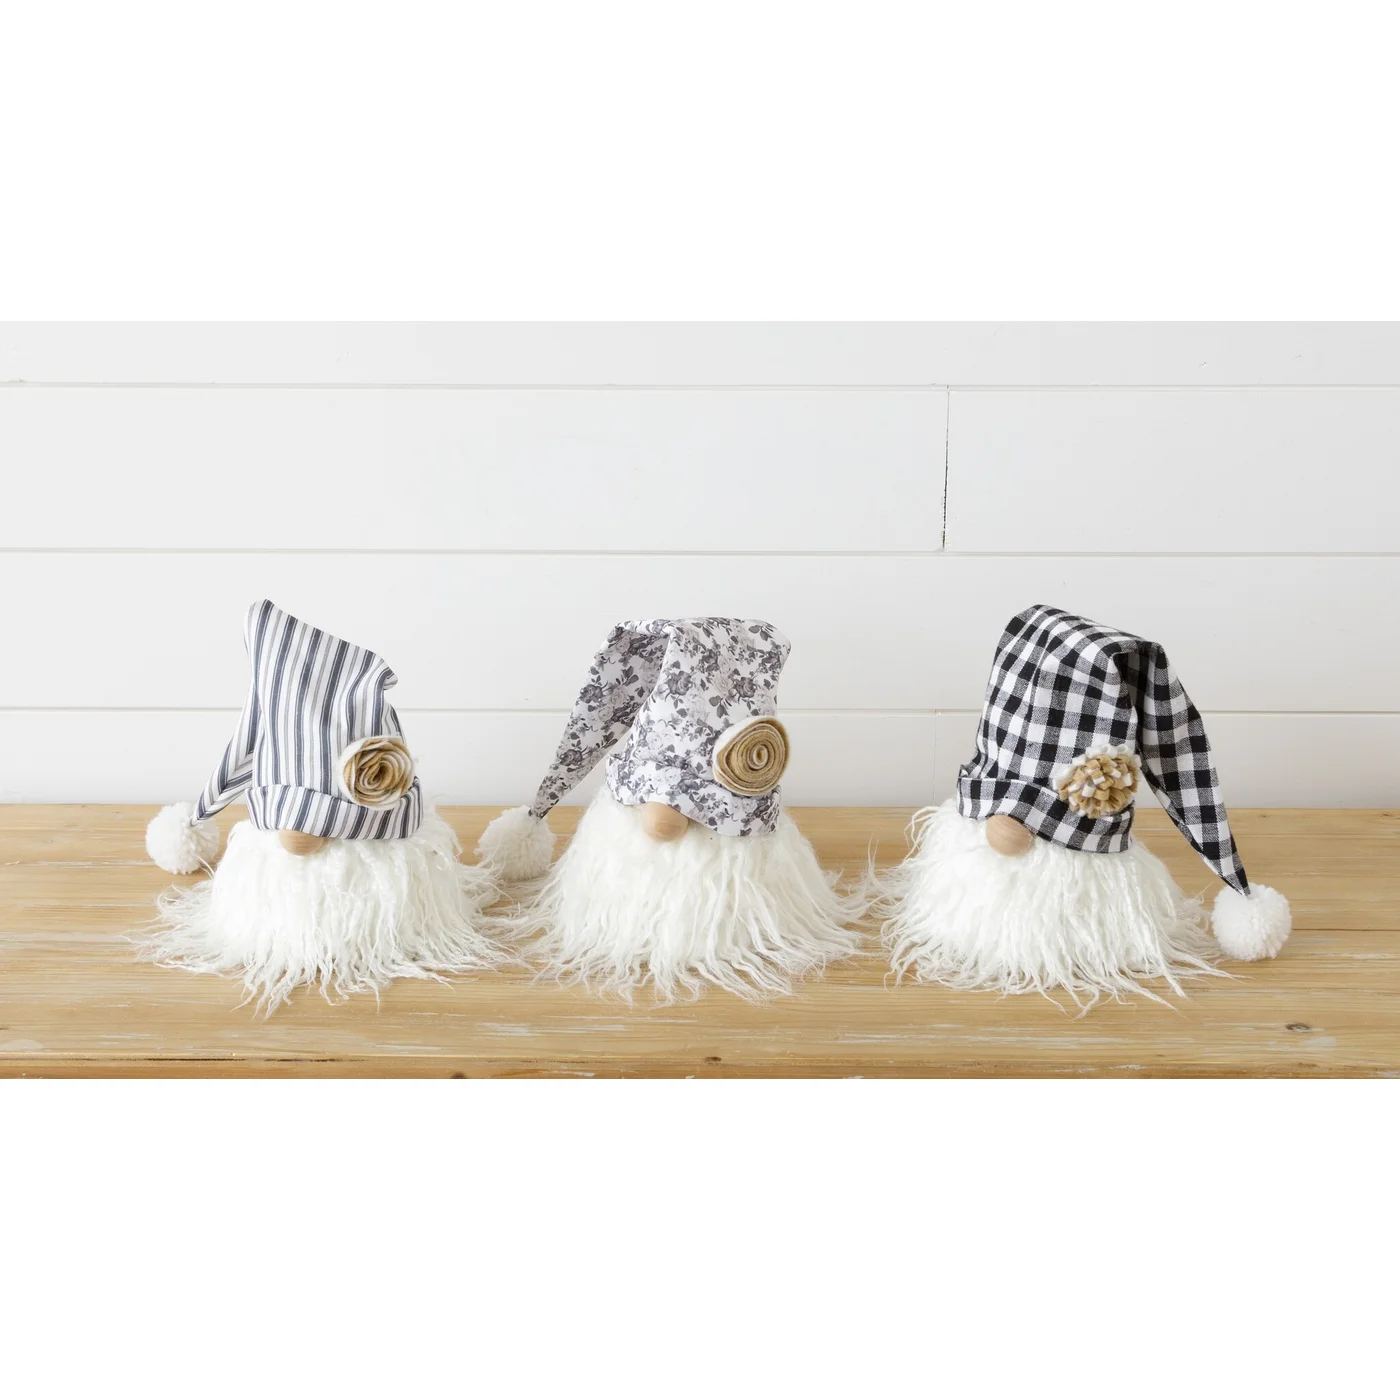 Set of 3 Gnomes With Black And White Pattern Hats